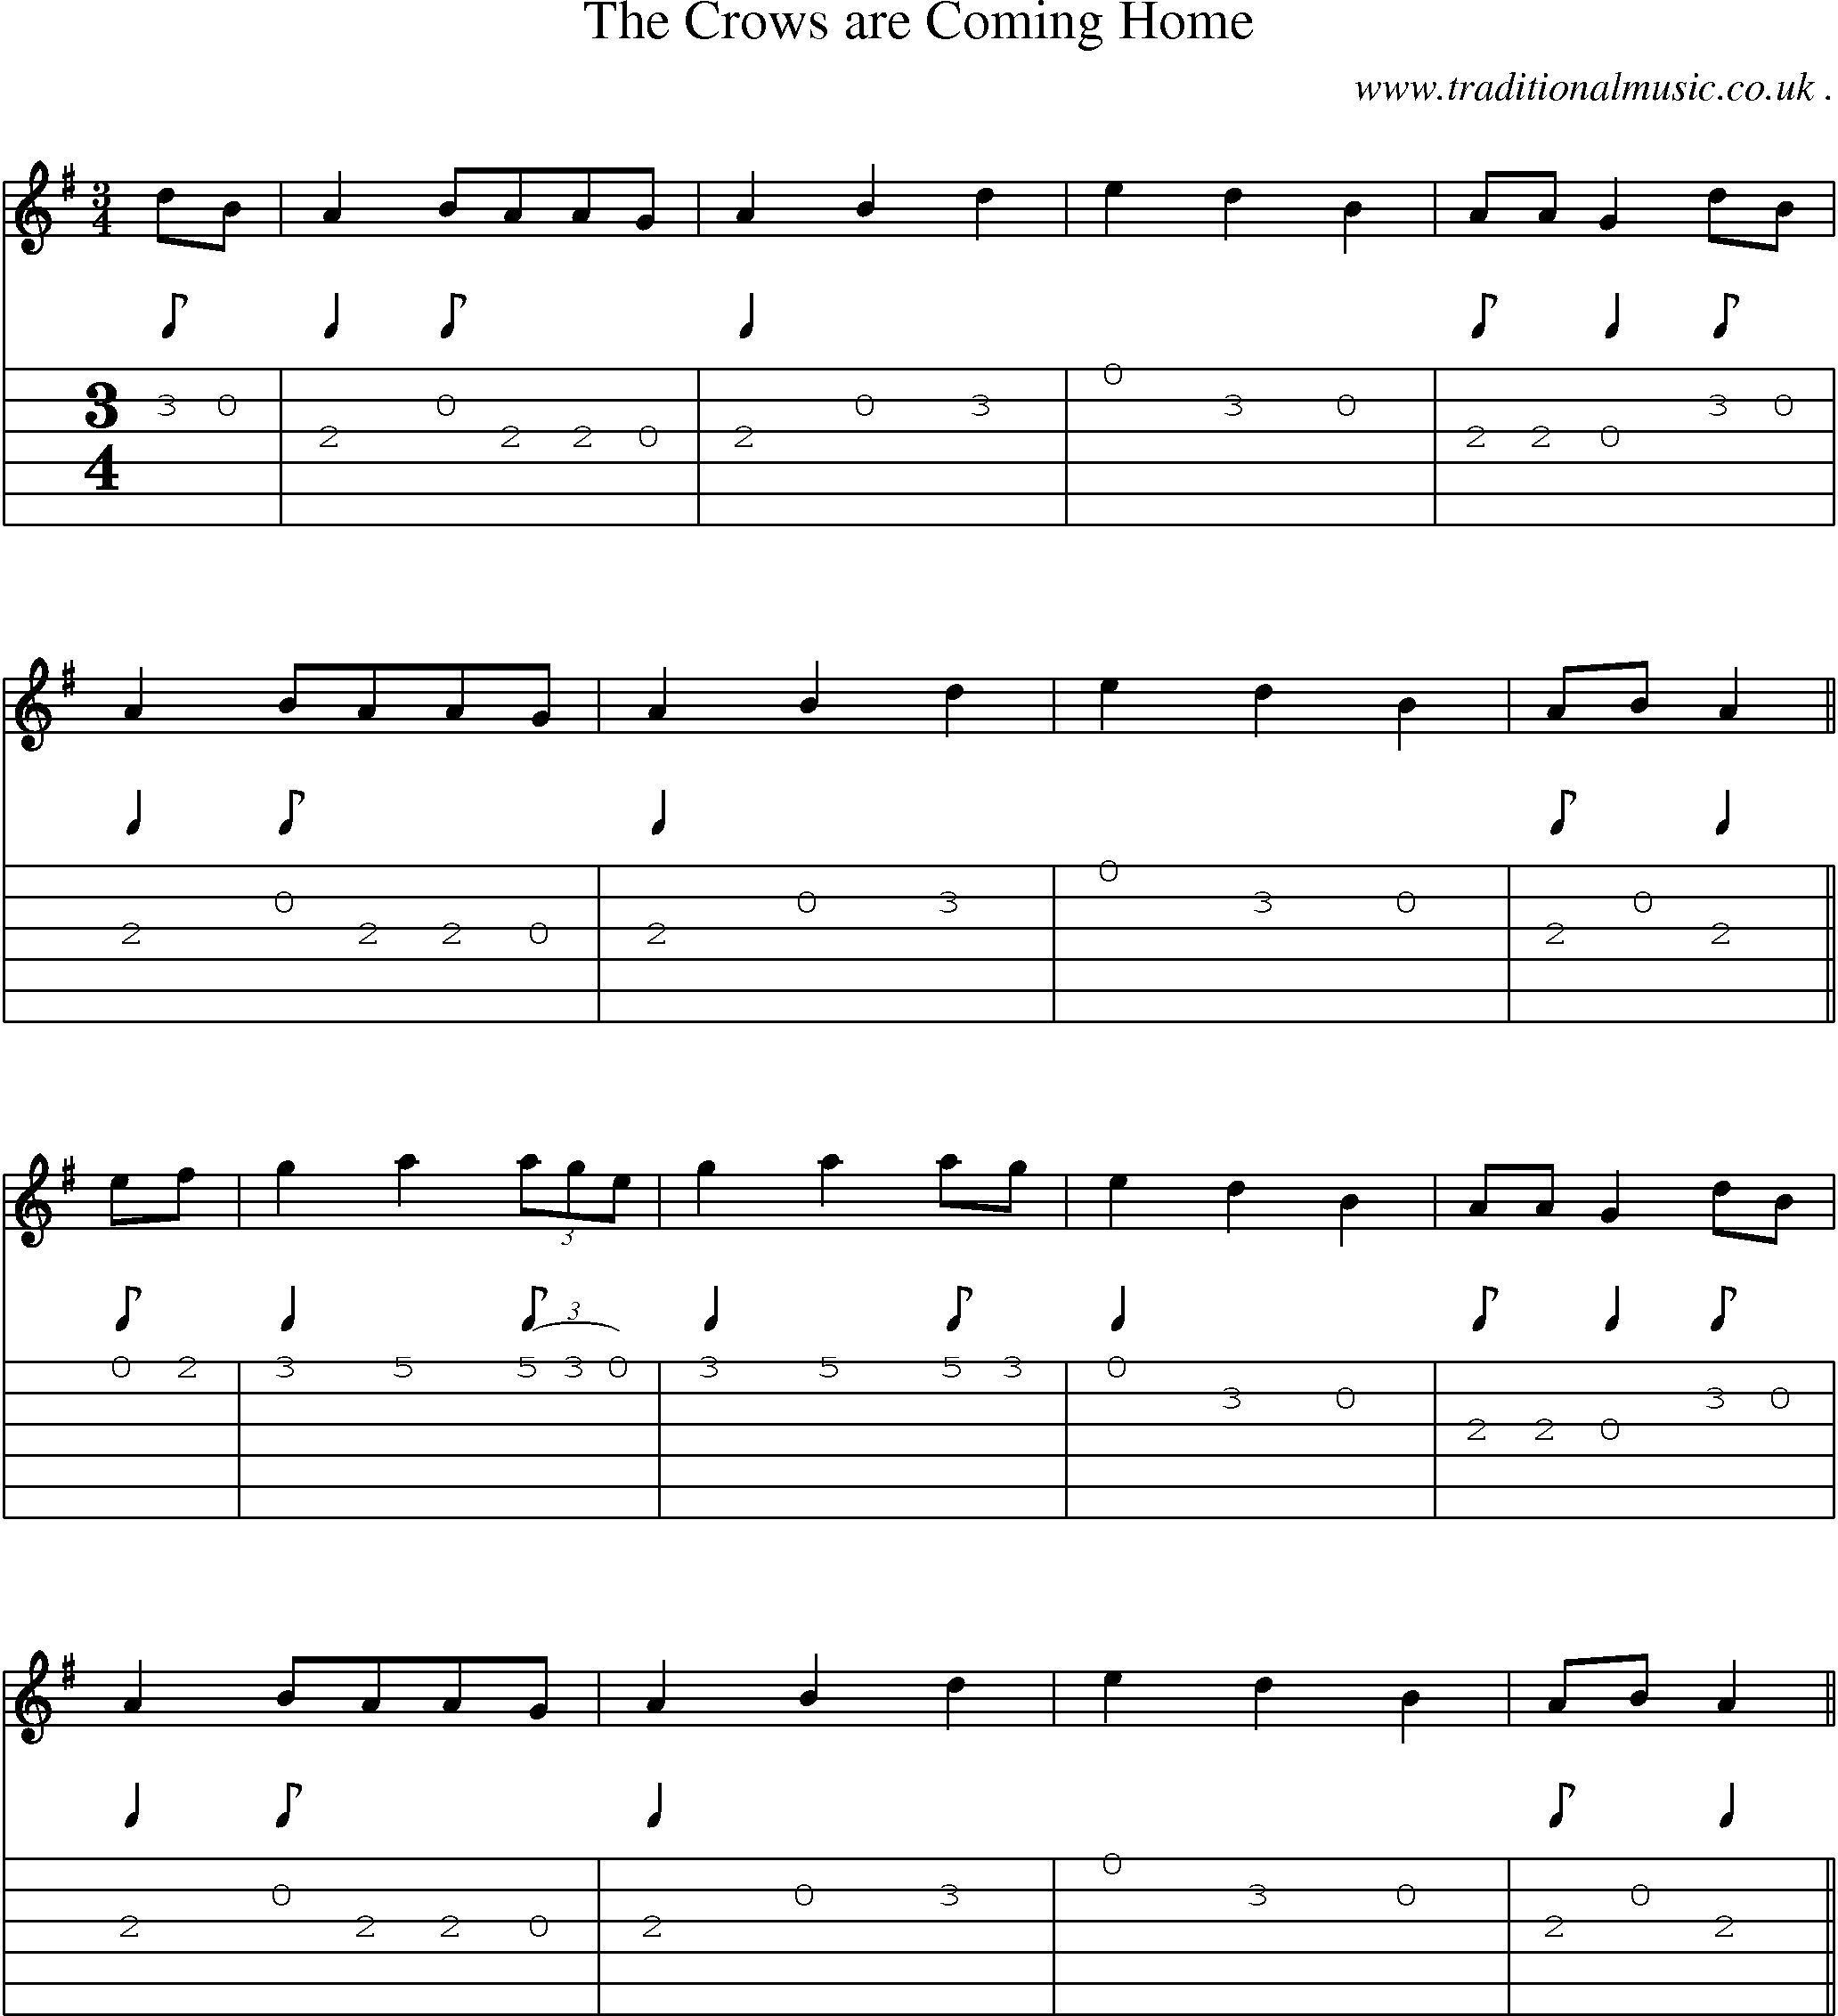 Sheet-Music and Guitar Tabs for The Crows Are Coming Home